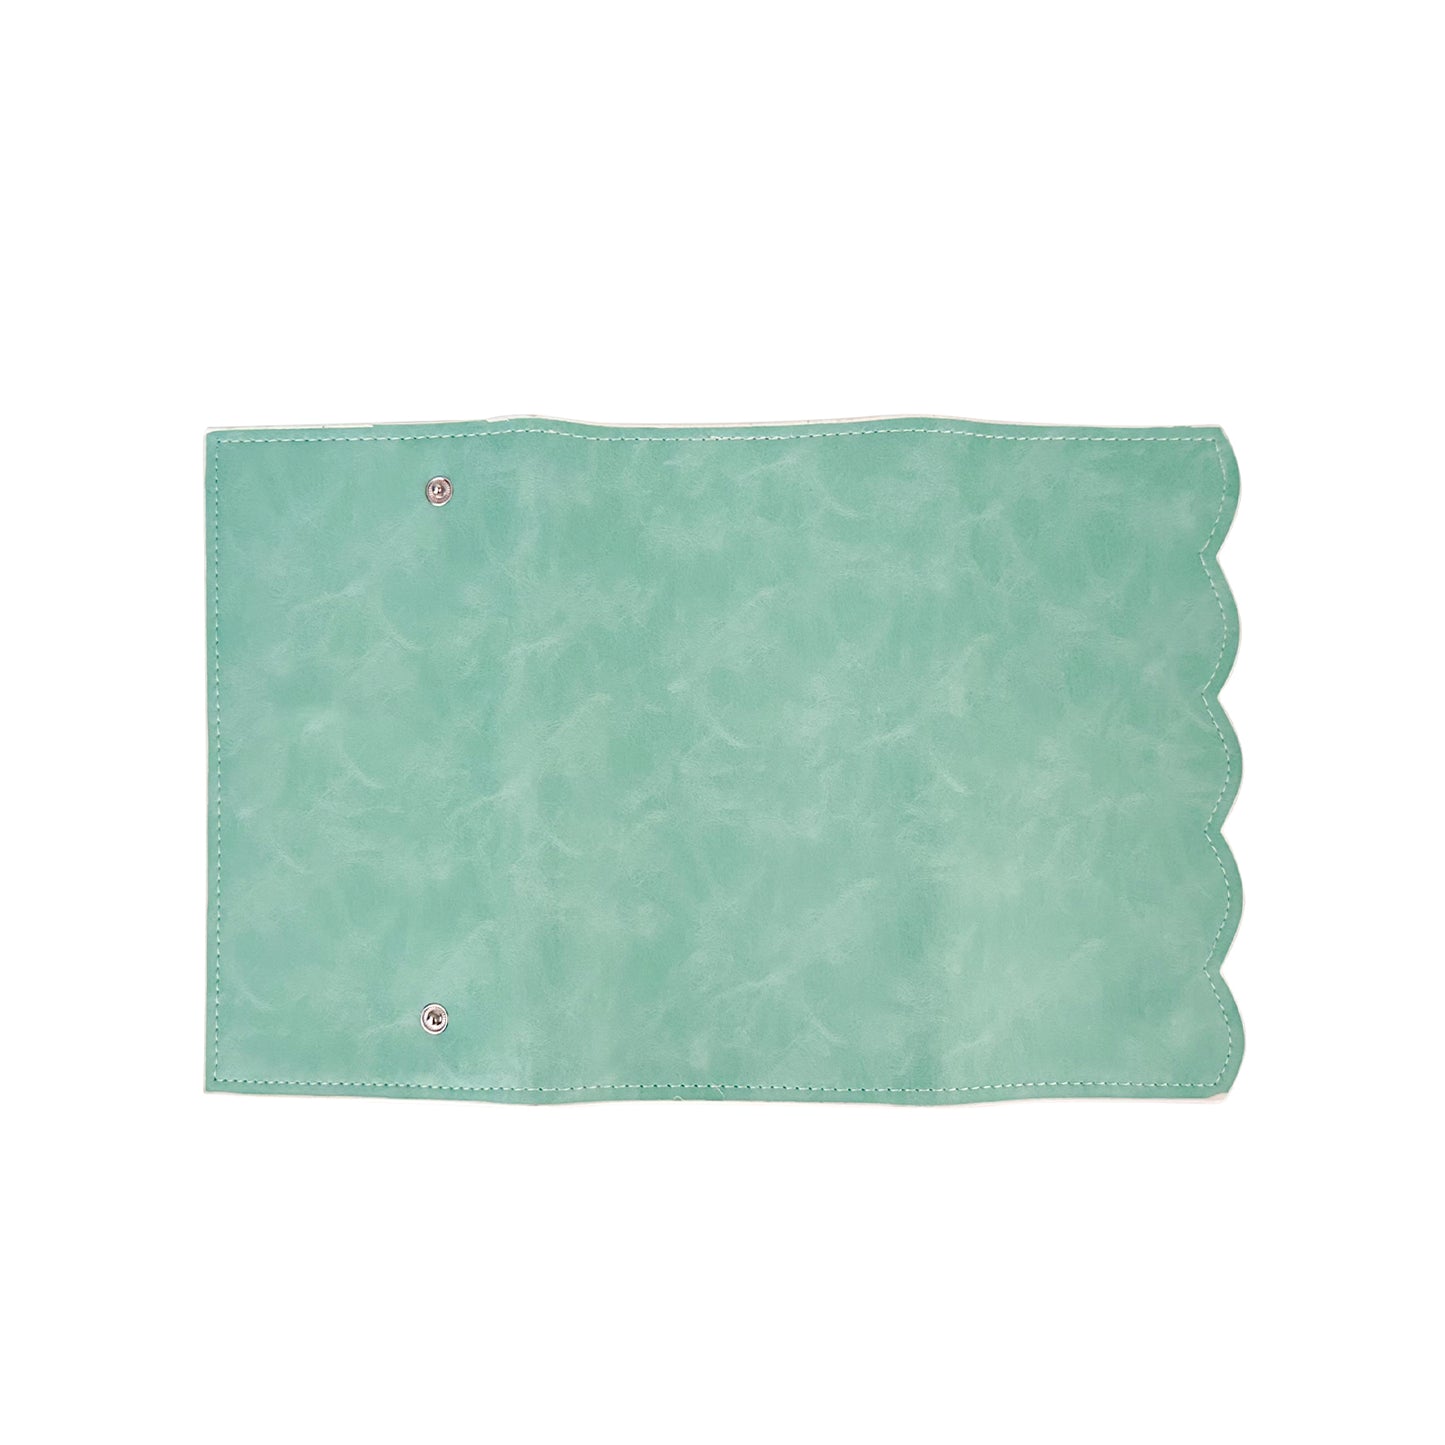 25Pcs Scalloped Wallets Mint Clutch Bags Envelope Purse With Scalloped Bag